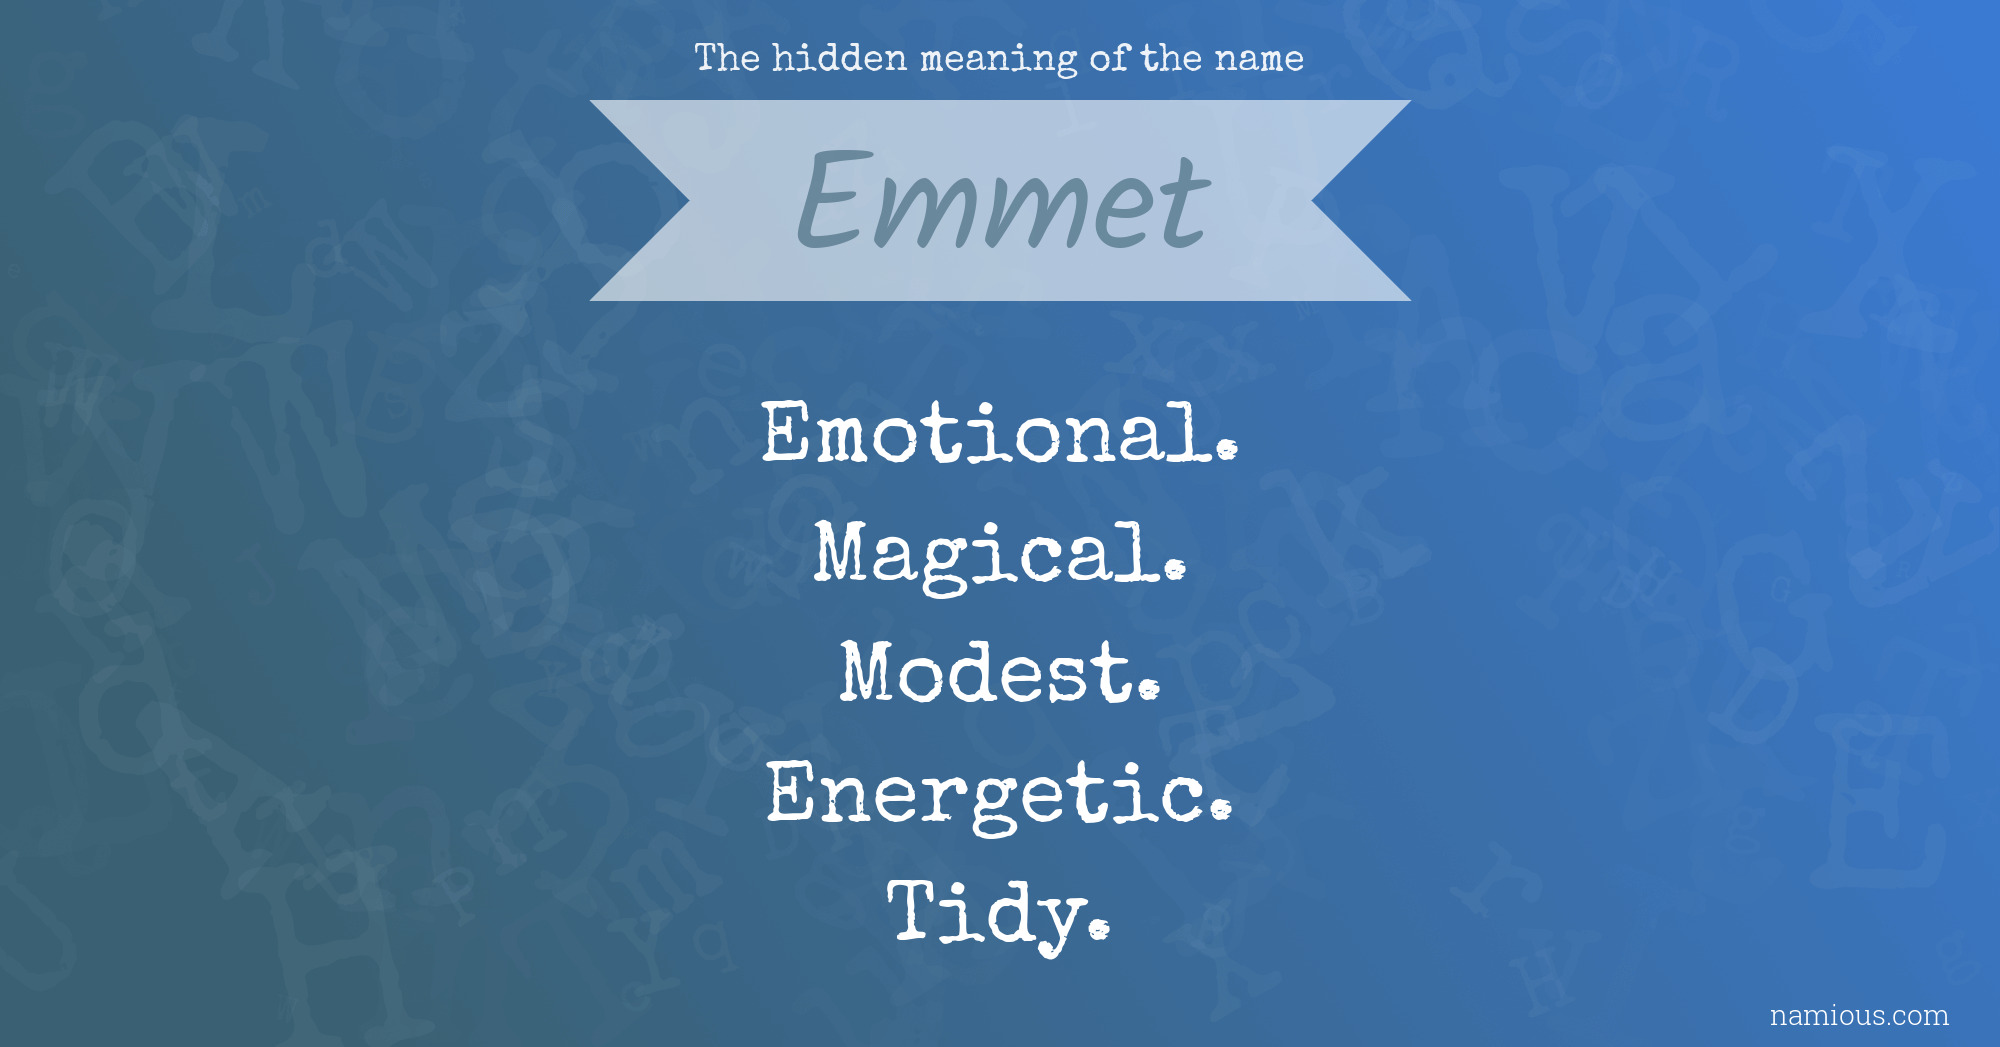 The hidden meaning of the name Emmet